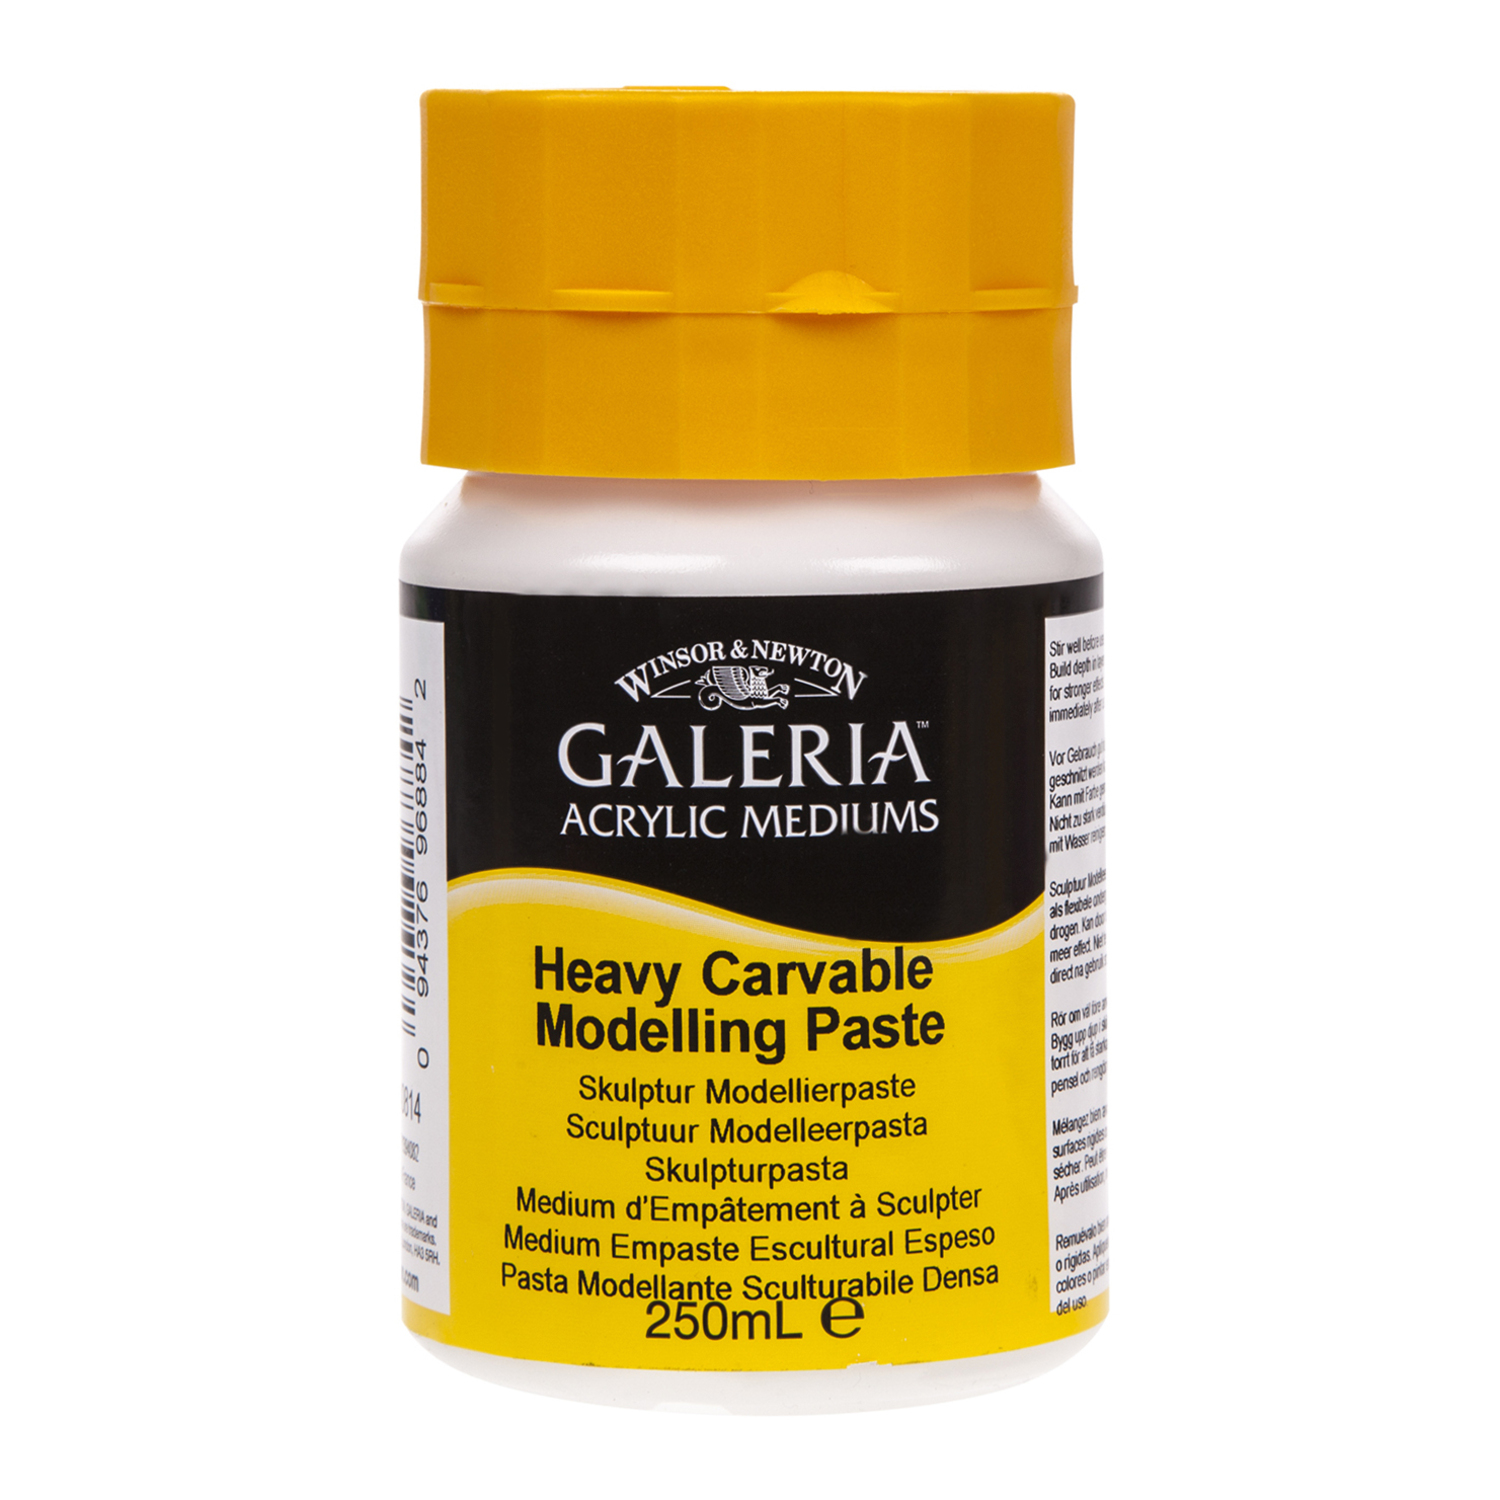 Winsor and Newton 250ml Galeria Heavy Carvable Modelling Paste Image